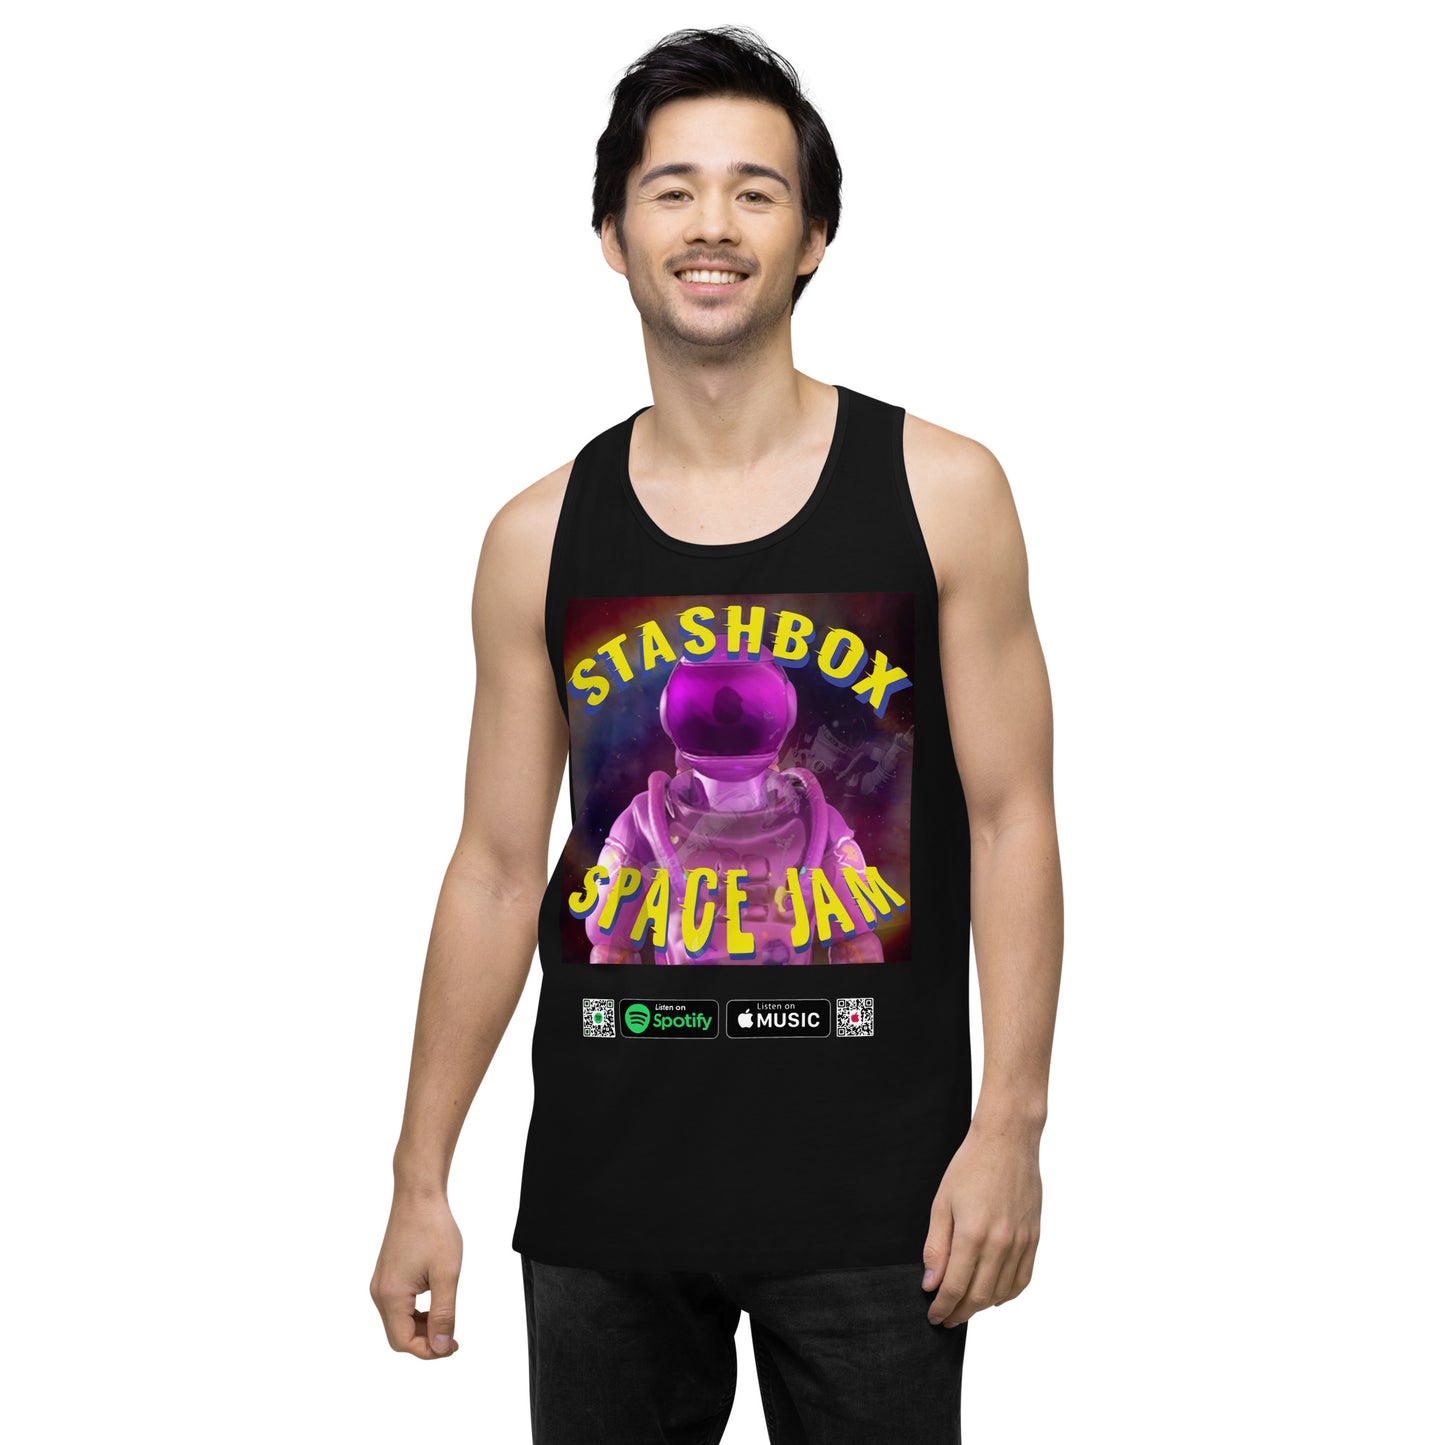 Space Jam: Unleash Cosmic Style with Stashbox Men’s Premium Tank Top, Artwork #005. Dive into the universe with this premium tank, perfect for space enthusiasts and trendsetters. #StashboxGalaxy #SpaceExplorationFashion #CosmicComfort"